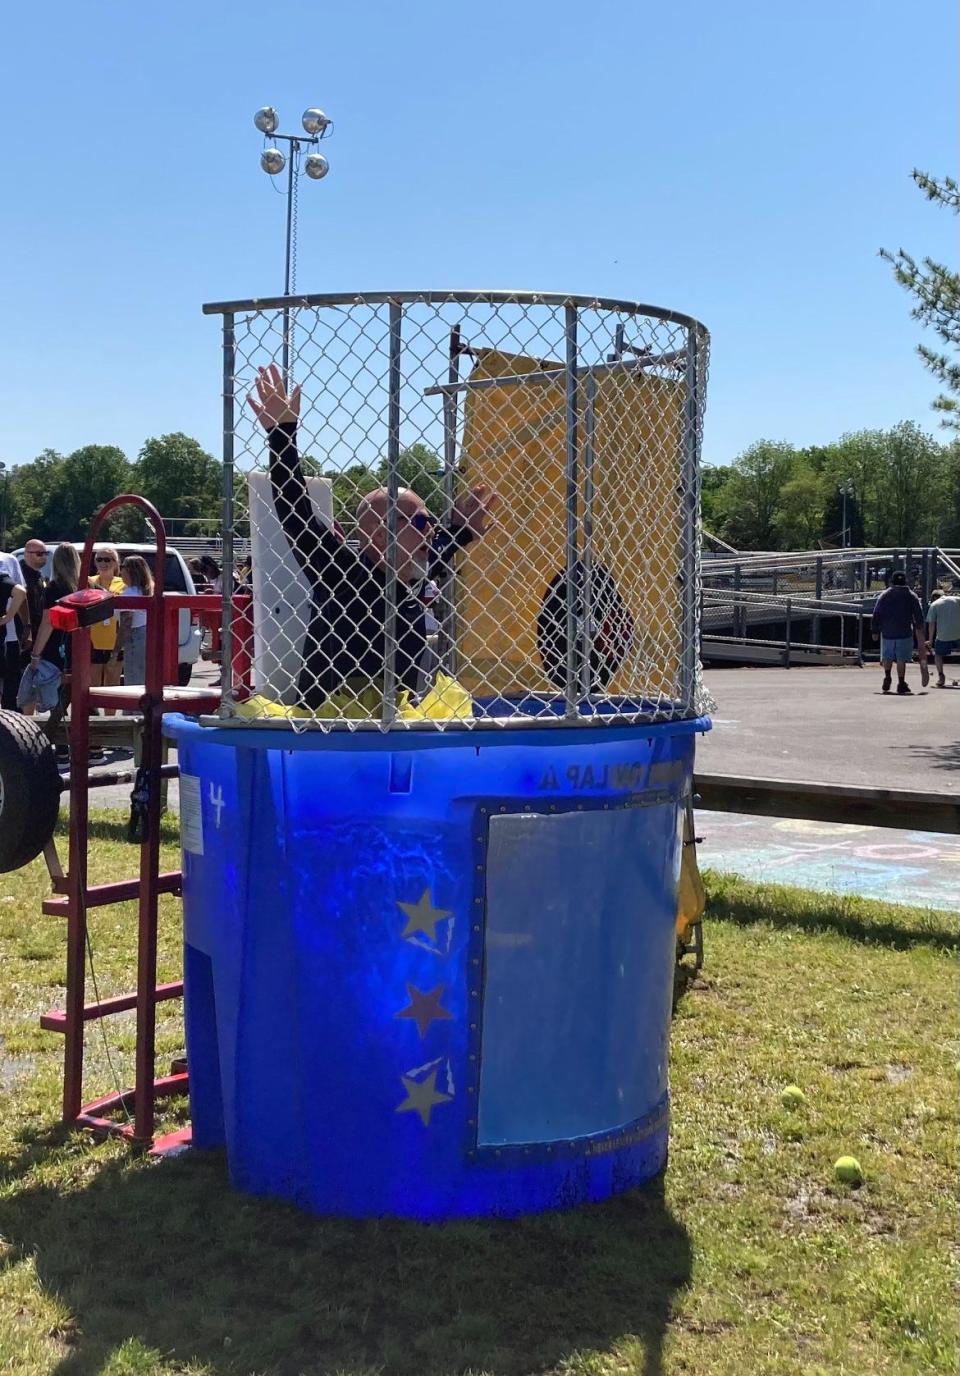 Monmouth Regional social studies teacher Joseph Nappi, pictured here in the dunk tank for a school fundraiser, is the New Jersey Teacher of the Year, and is a finalist for the National Teacher of the Year award.